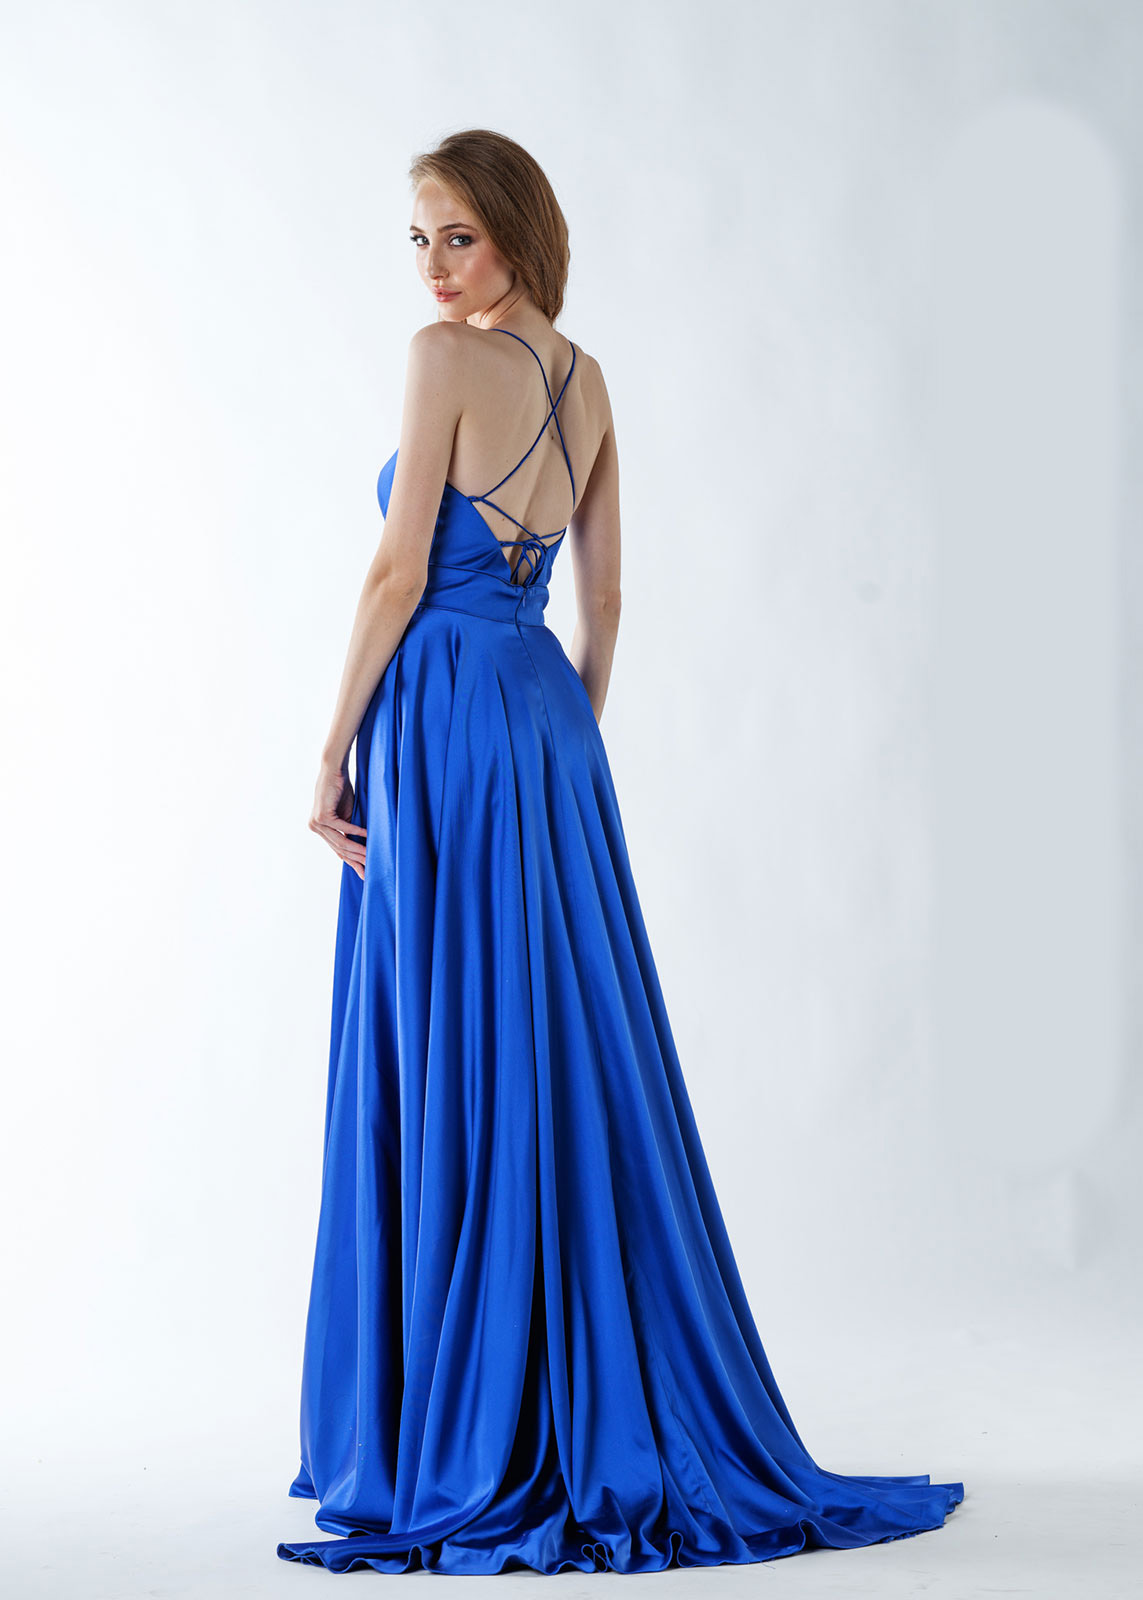 The rear of the truly elegant and flowng Madalina prom dress from MK Prom in Bletchley Milton Keynes in a fabulous sheer Royal blue satin fabric